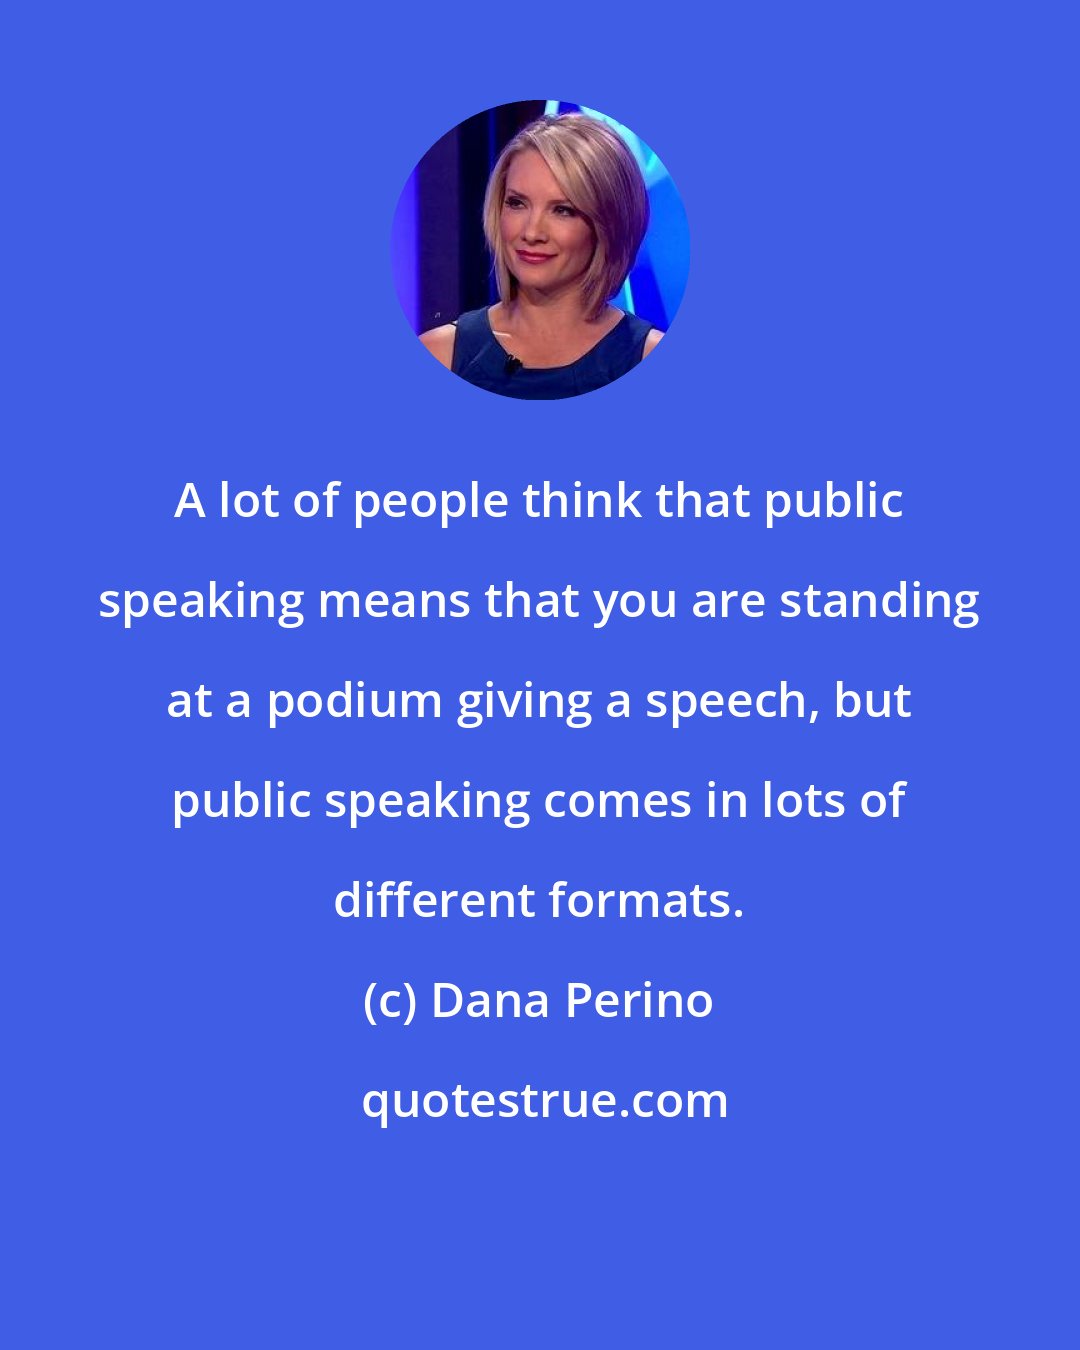 Dana Perino: A lot of people think that public speaking means that you are standing at a podium giving a speech, but public speaking comes in lots of different formats.